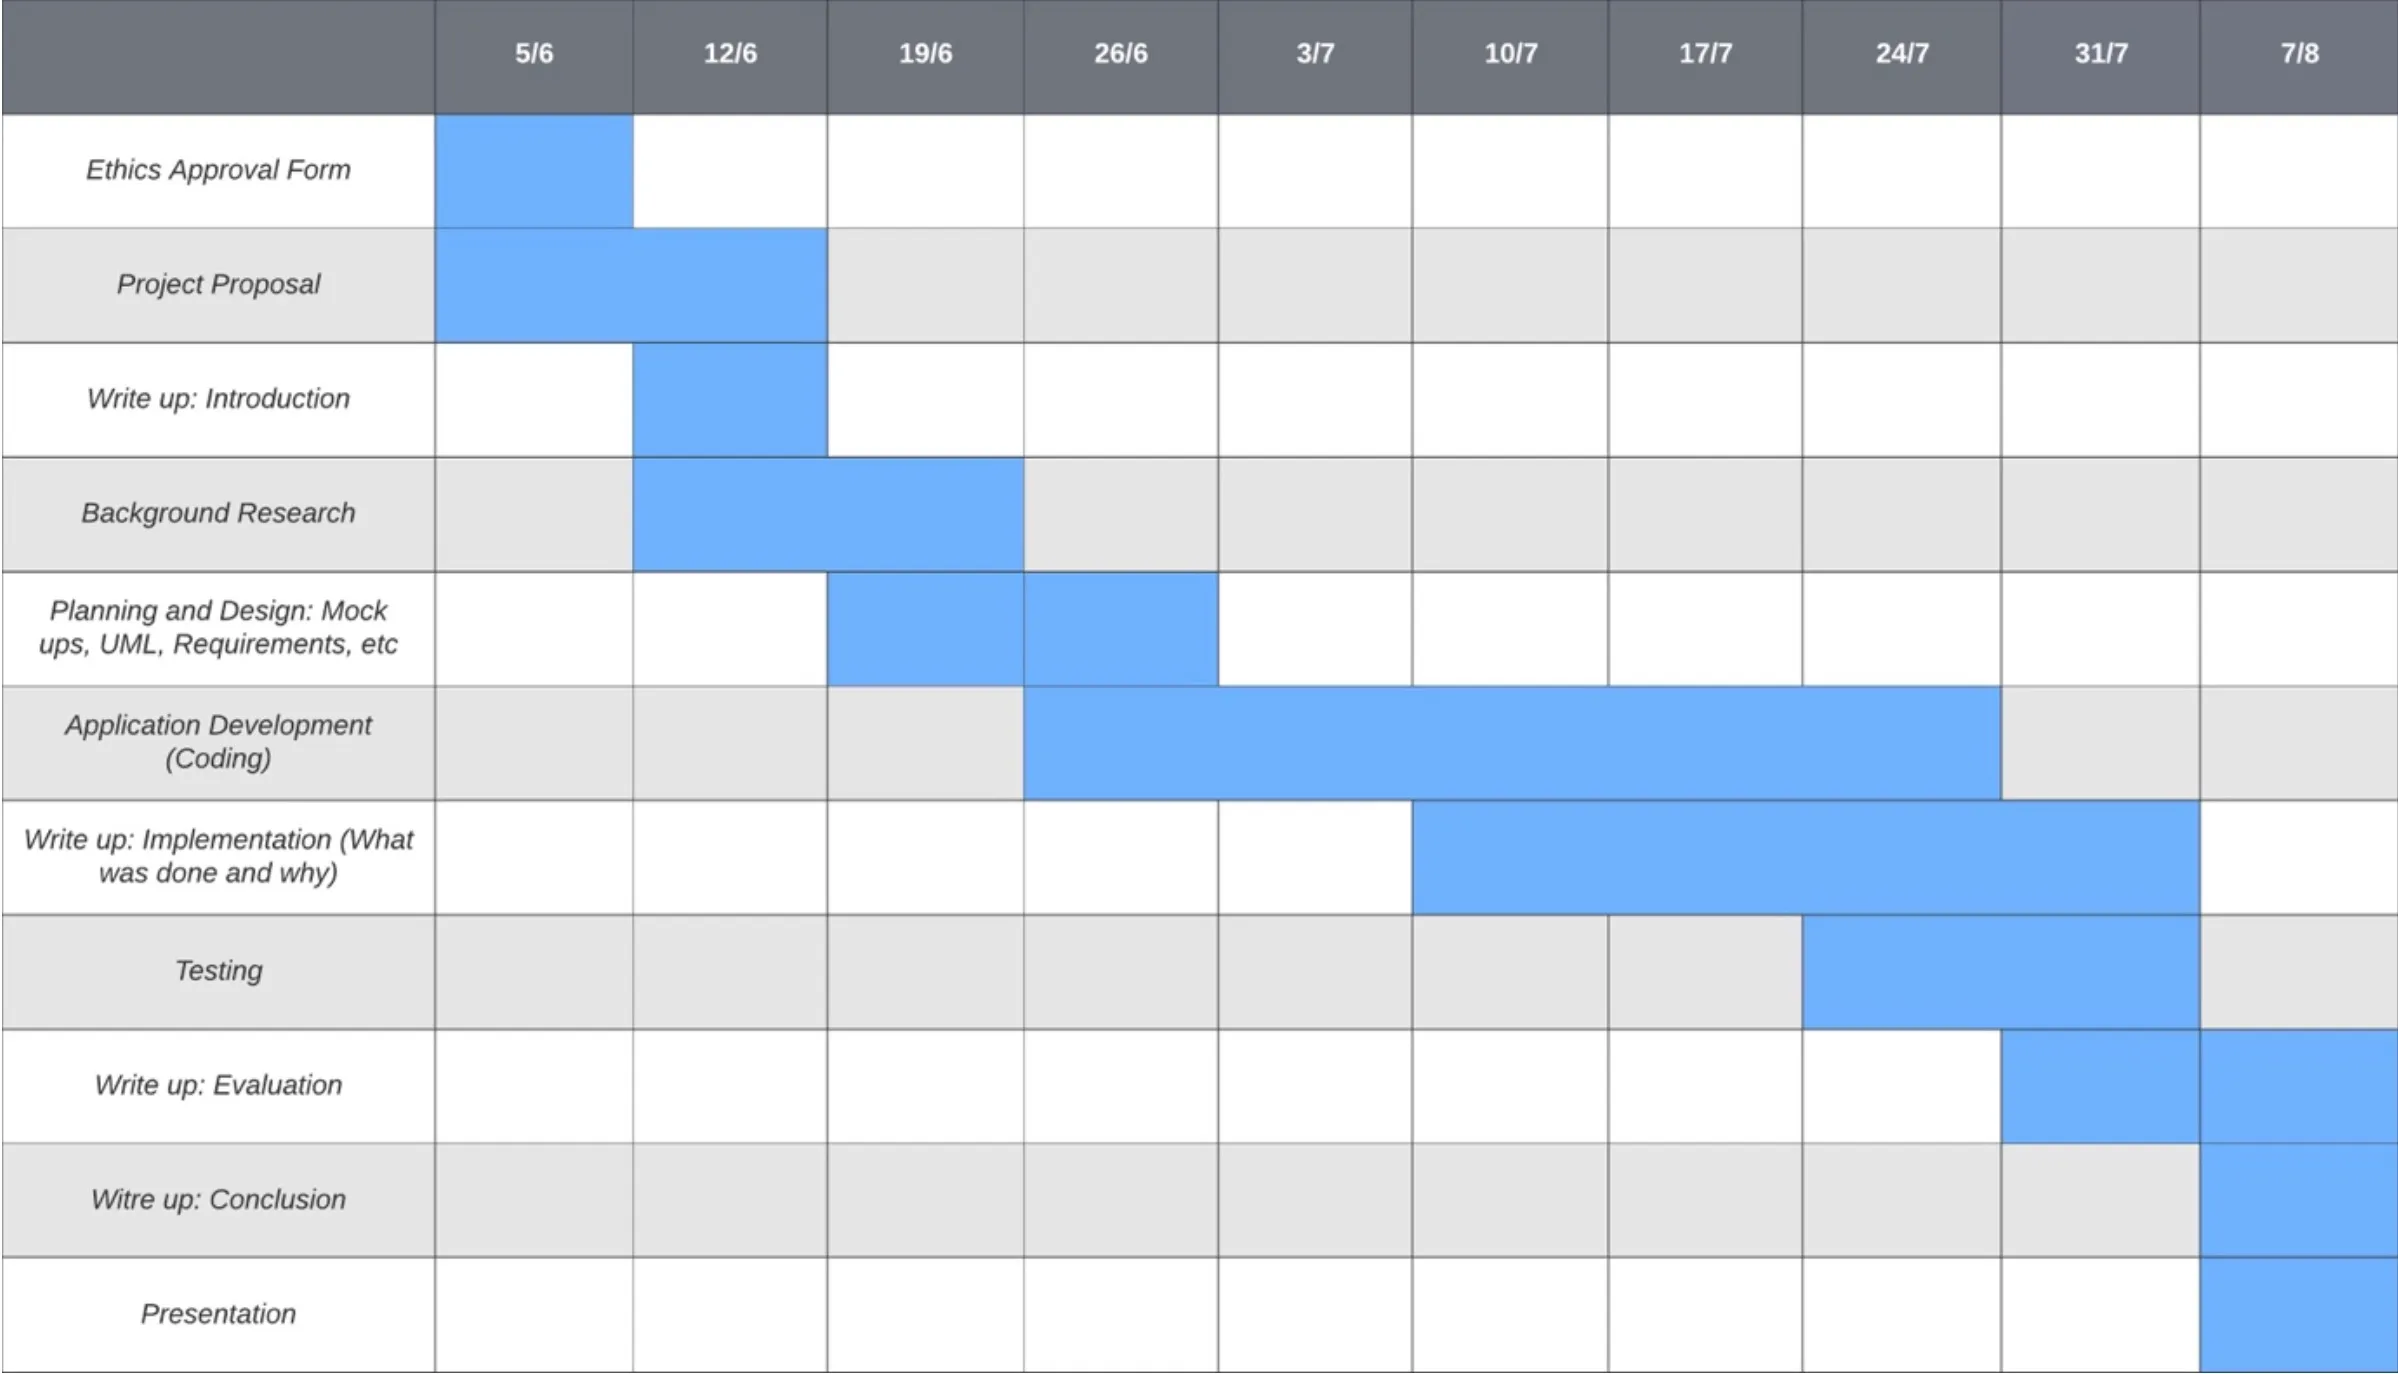 Gantt chart of the project timeline